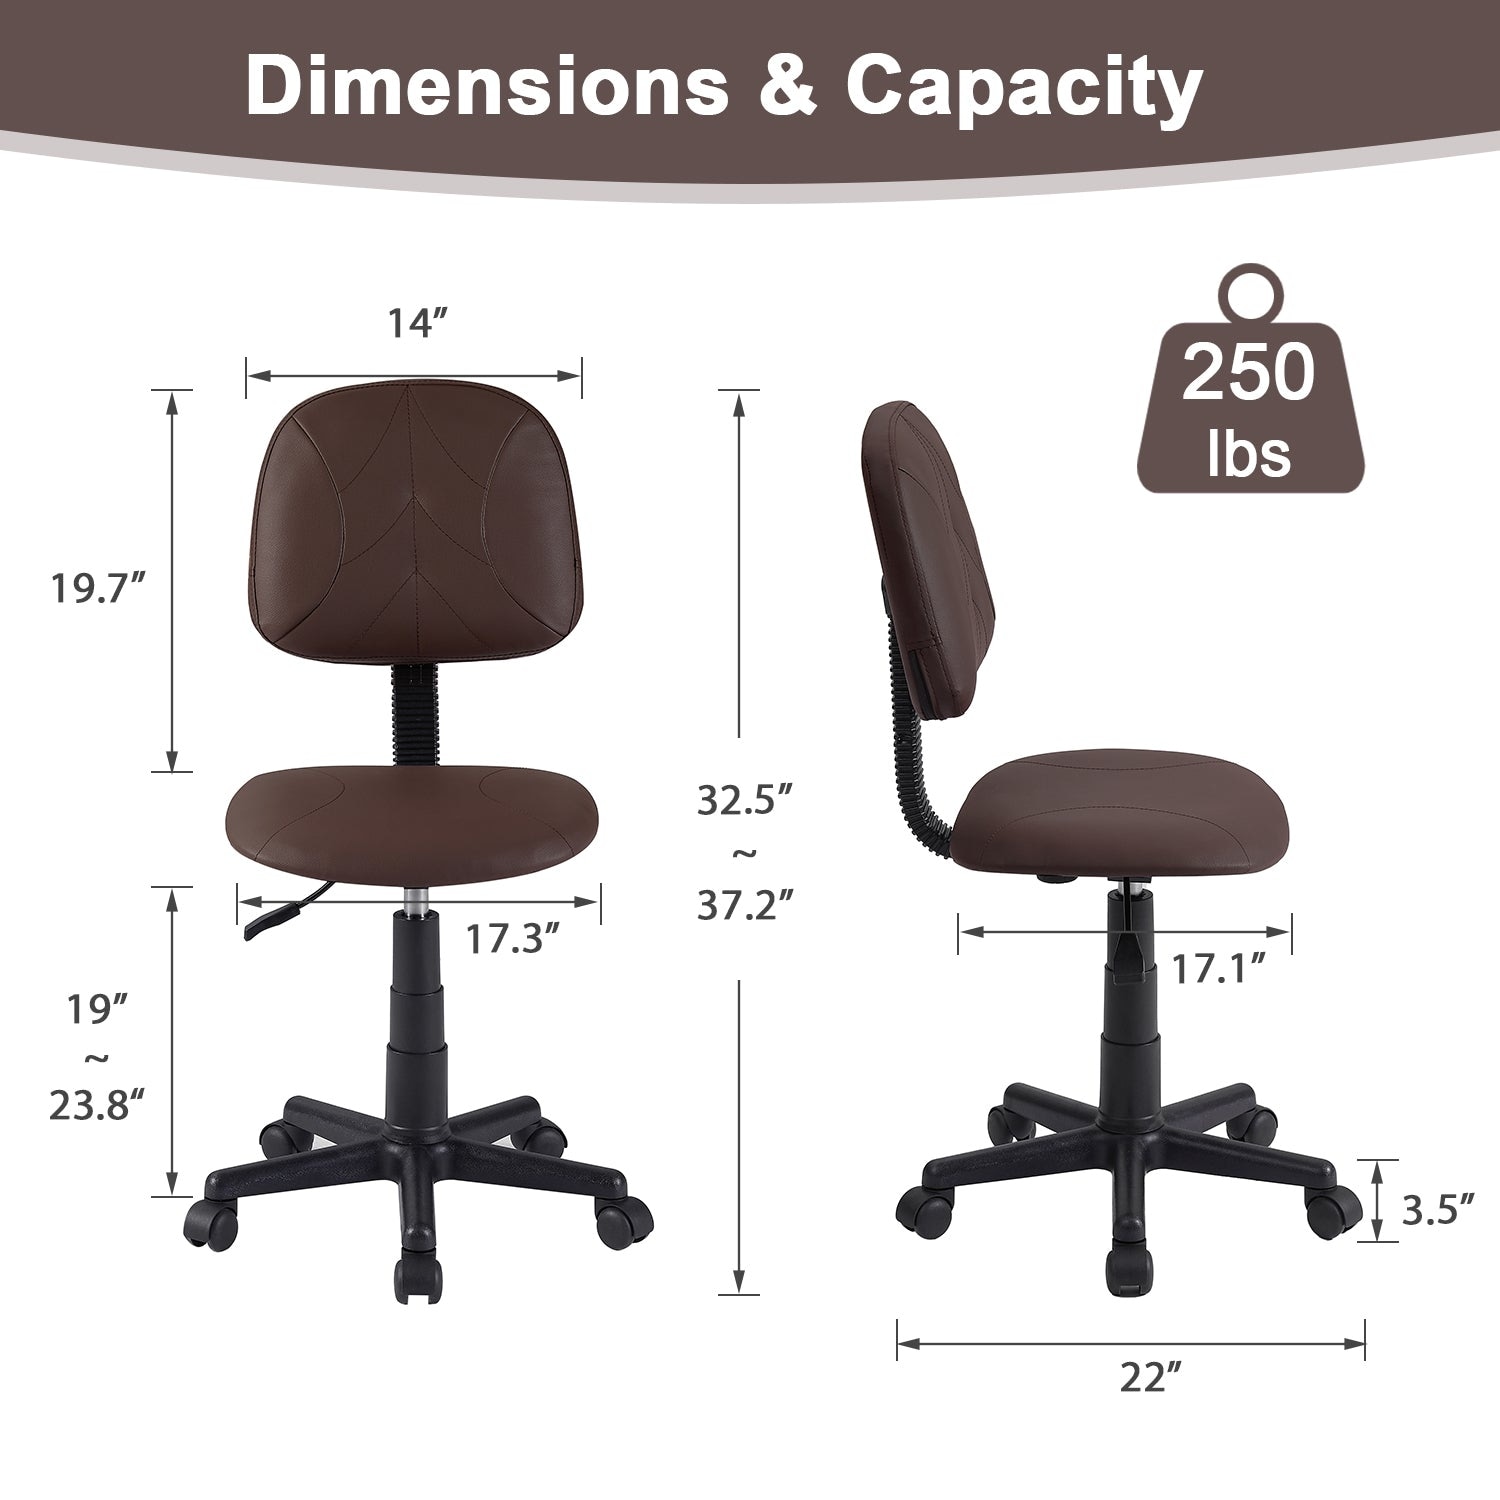 https://ak1.ostkcdn.com/images/products/is/images/direct/3c59fa32625bcdc65cbe13a3673f49245de9eed6/VECELO-Simple-Design-Chair%2C-Morden-Adjustable-Height-Office-Chair-Desk-Chair-without-Arm.jpg